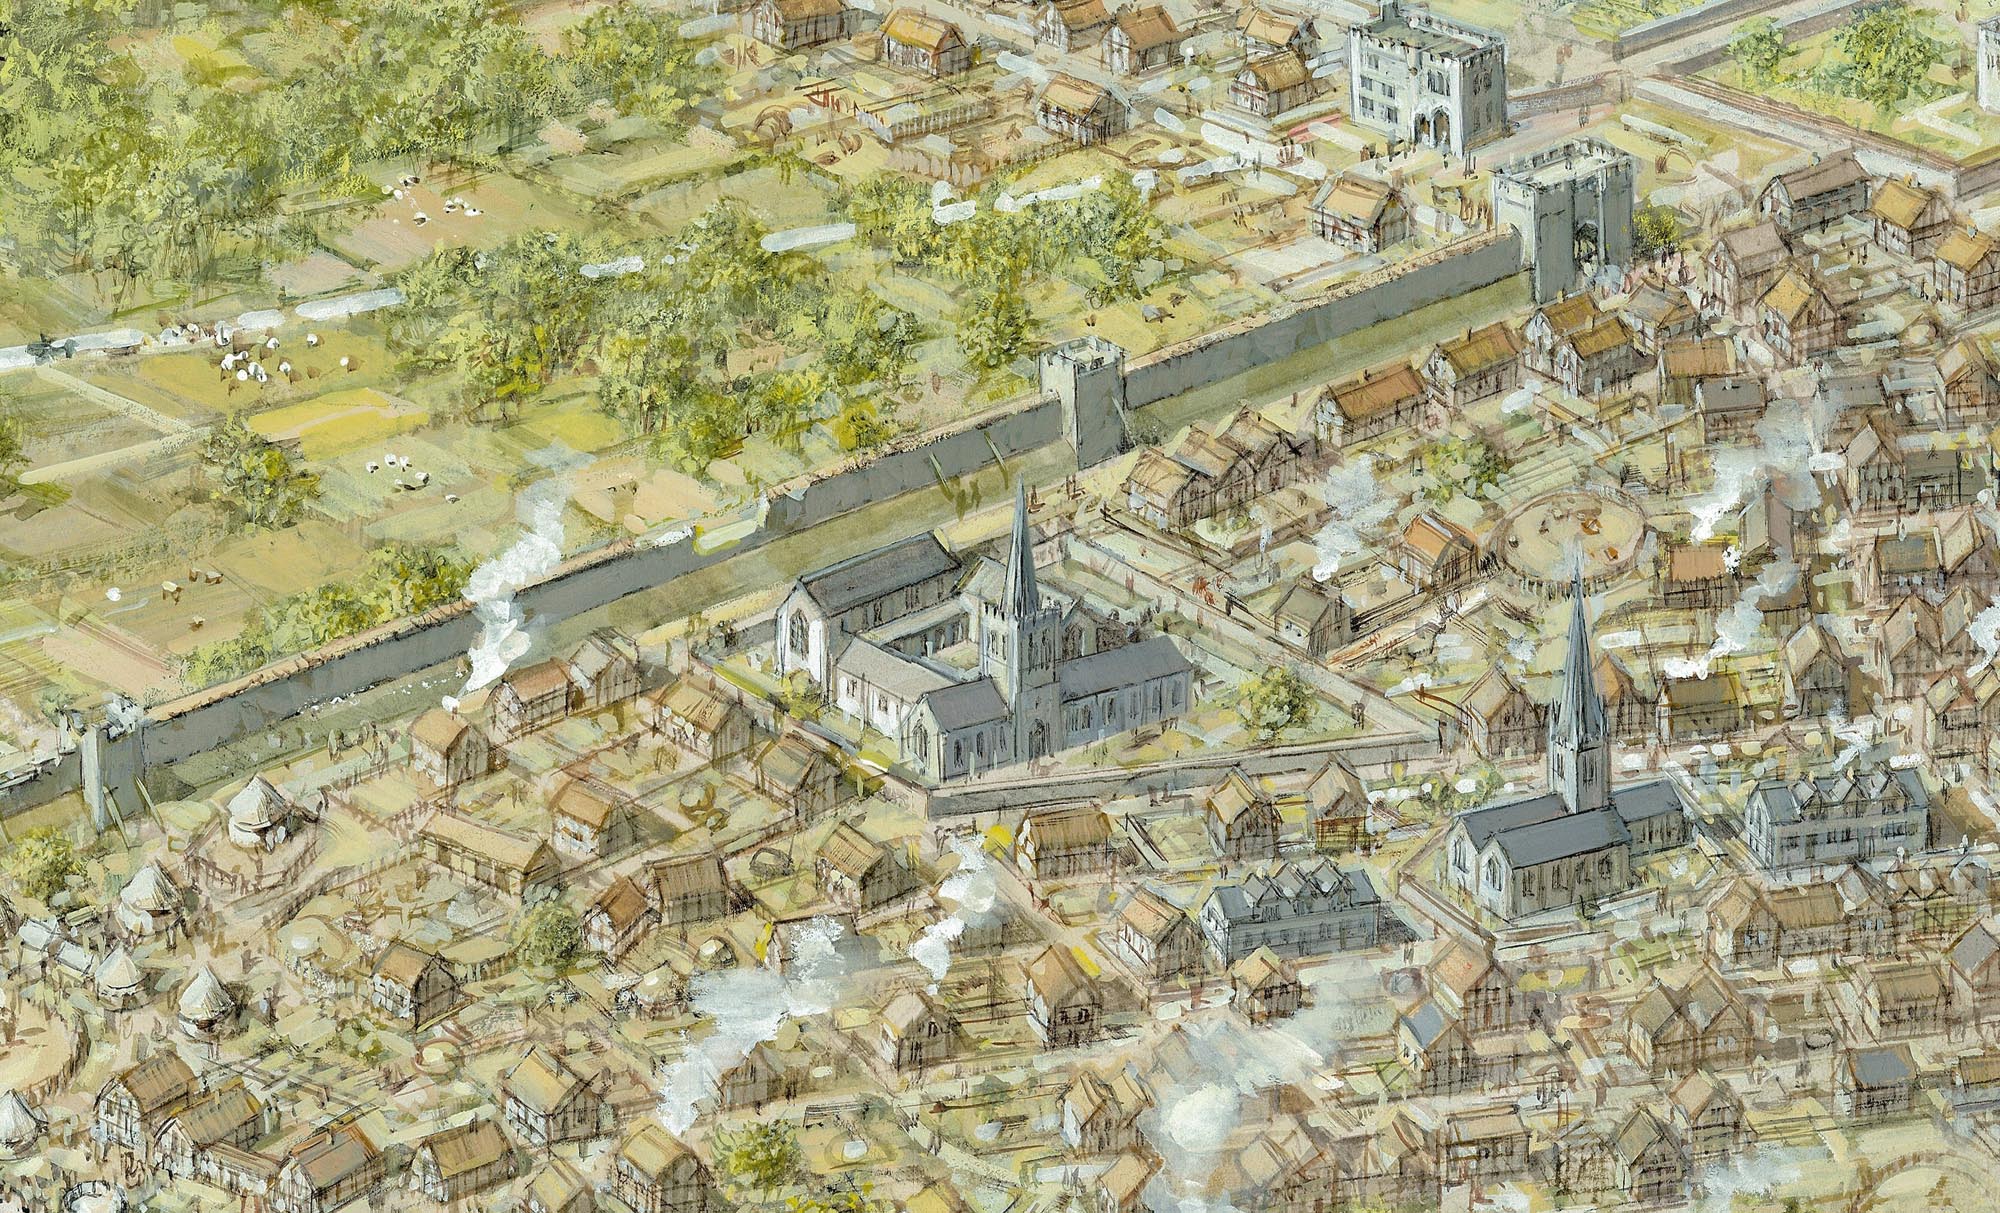 An artist impression of 15th Century Leicester - Mike Codd / University of Leicester Archaeological Services